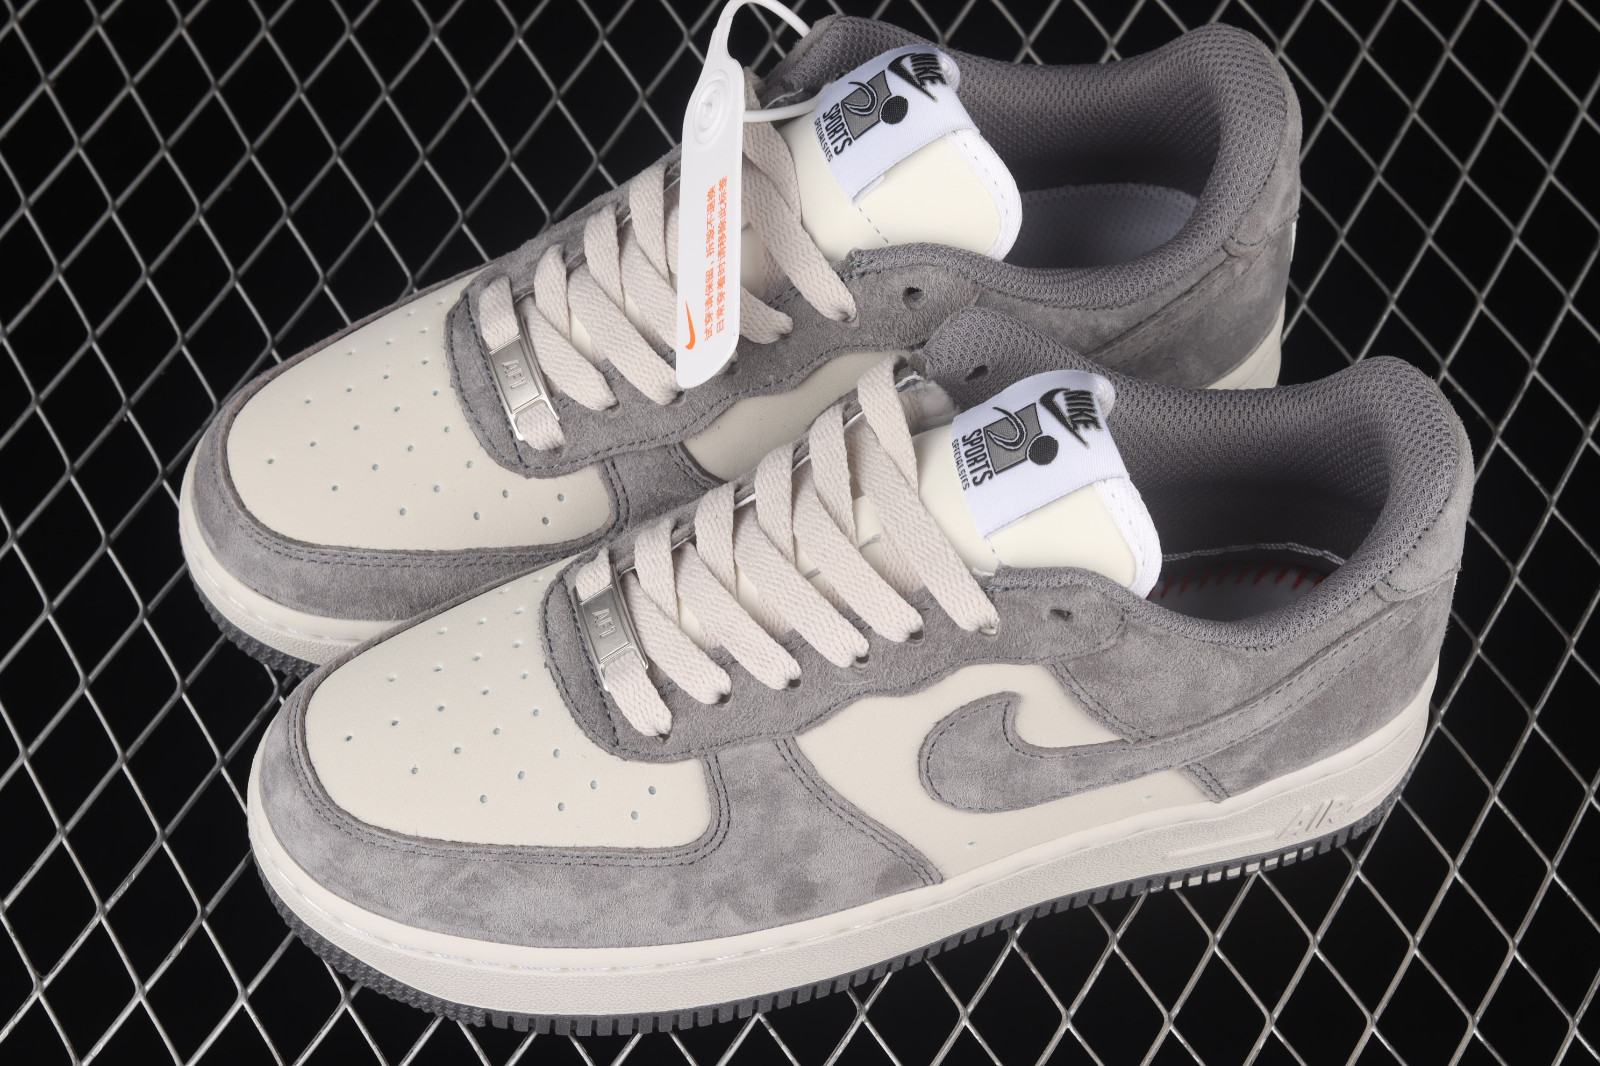 Nike Air Force 1 07 Low Wolf Grey White Shoes CW2288 - 866 - Nike  Hydreringsväst Kiger 4.0 - GmarShops